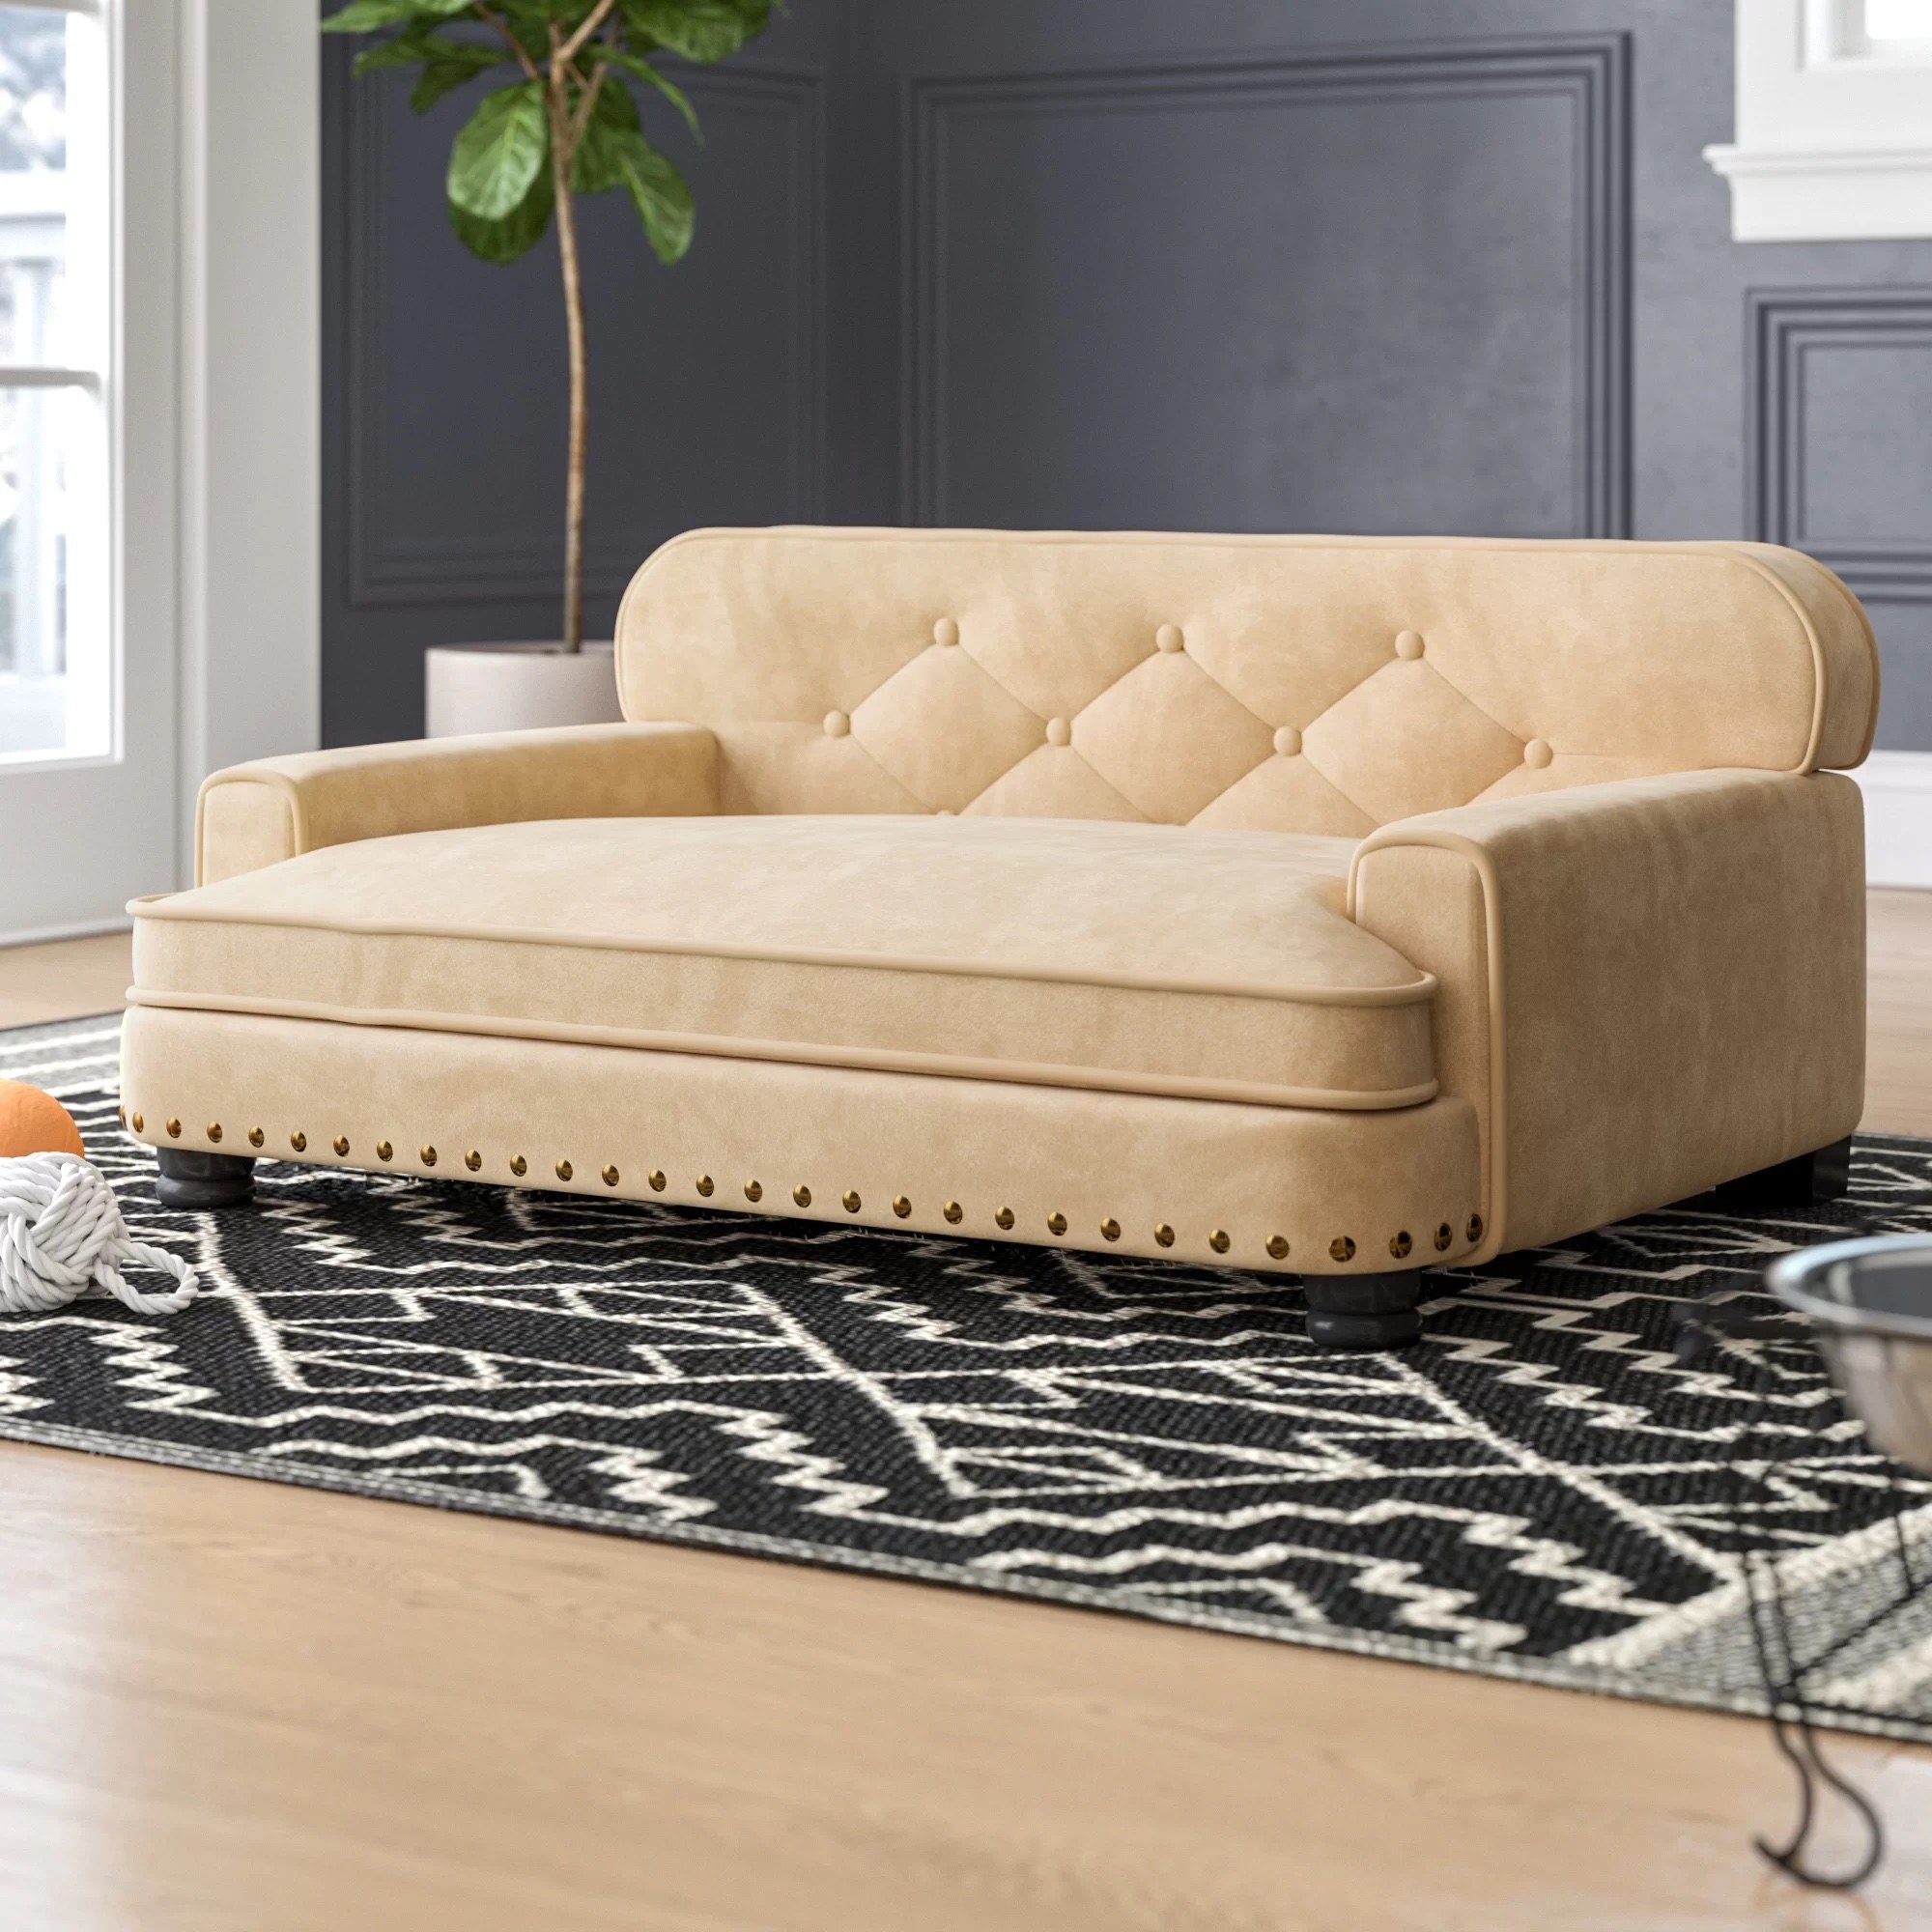 a cream colored dog sofa bed with tufted design